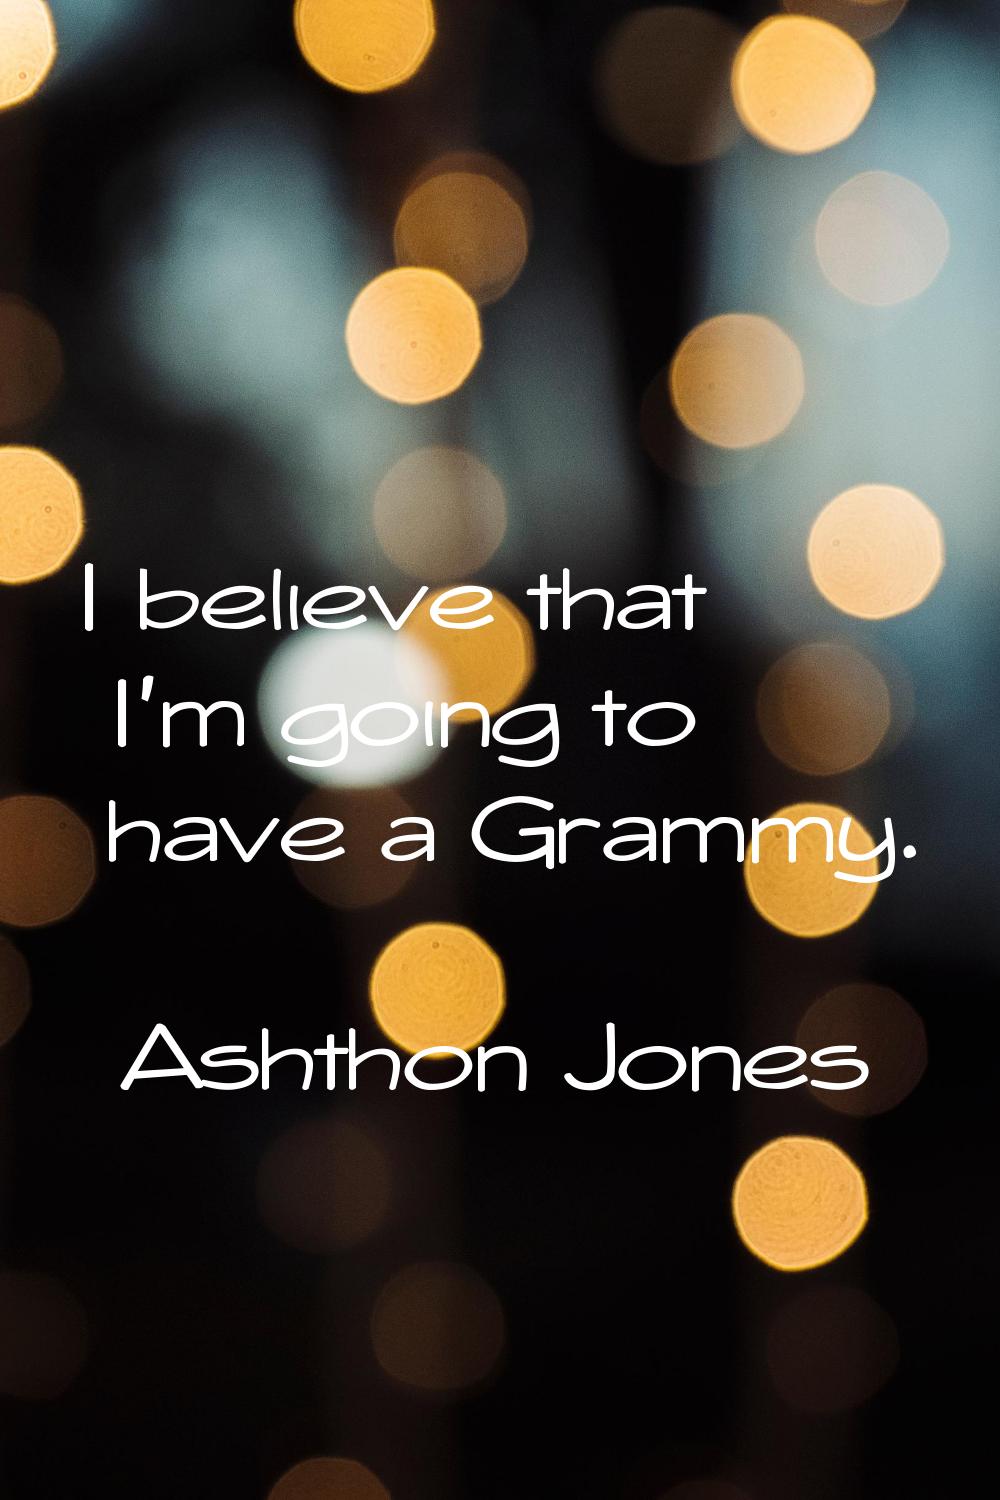 I believe that I'm going to have a Grammy.